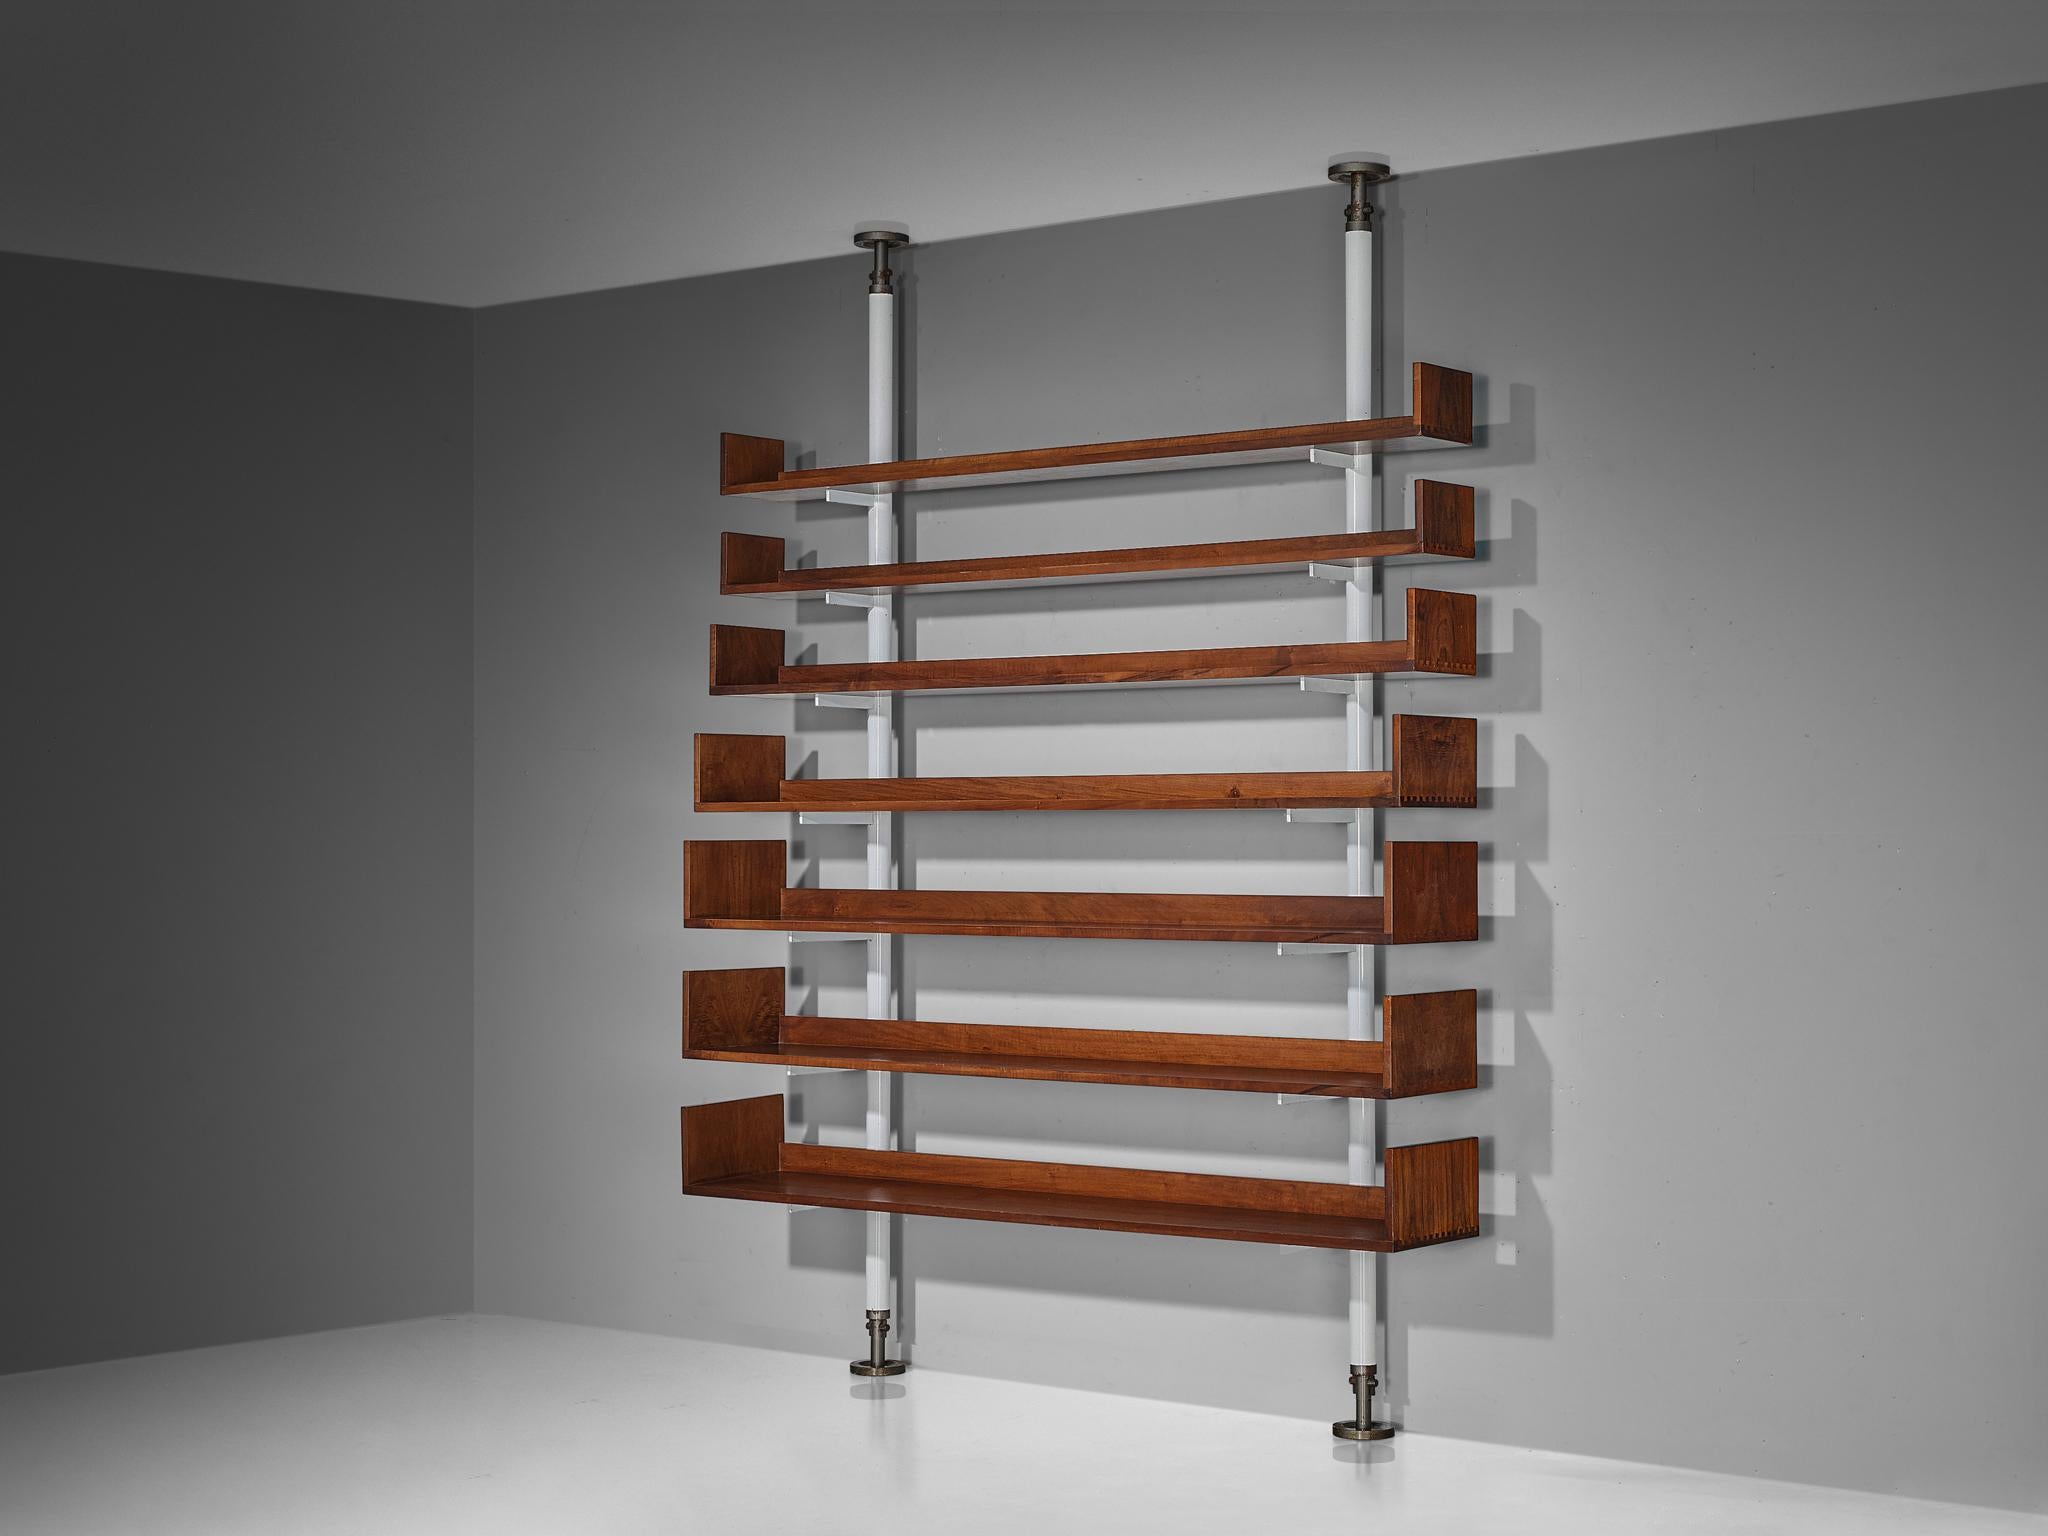 Carlo Scarpa for Bernini, library or wall unit, model '795', walnut, metal, Italy, design 1935, edition made in 1980s

Stunning library designed by Carlo Scarpa for Bernini. This wall unit displays different sized shelved with book ends, creating a